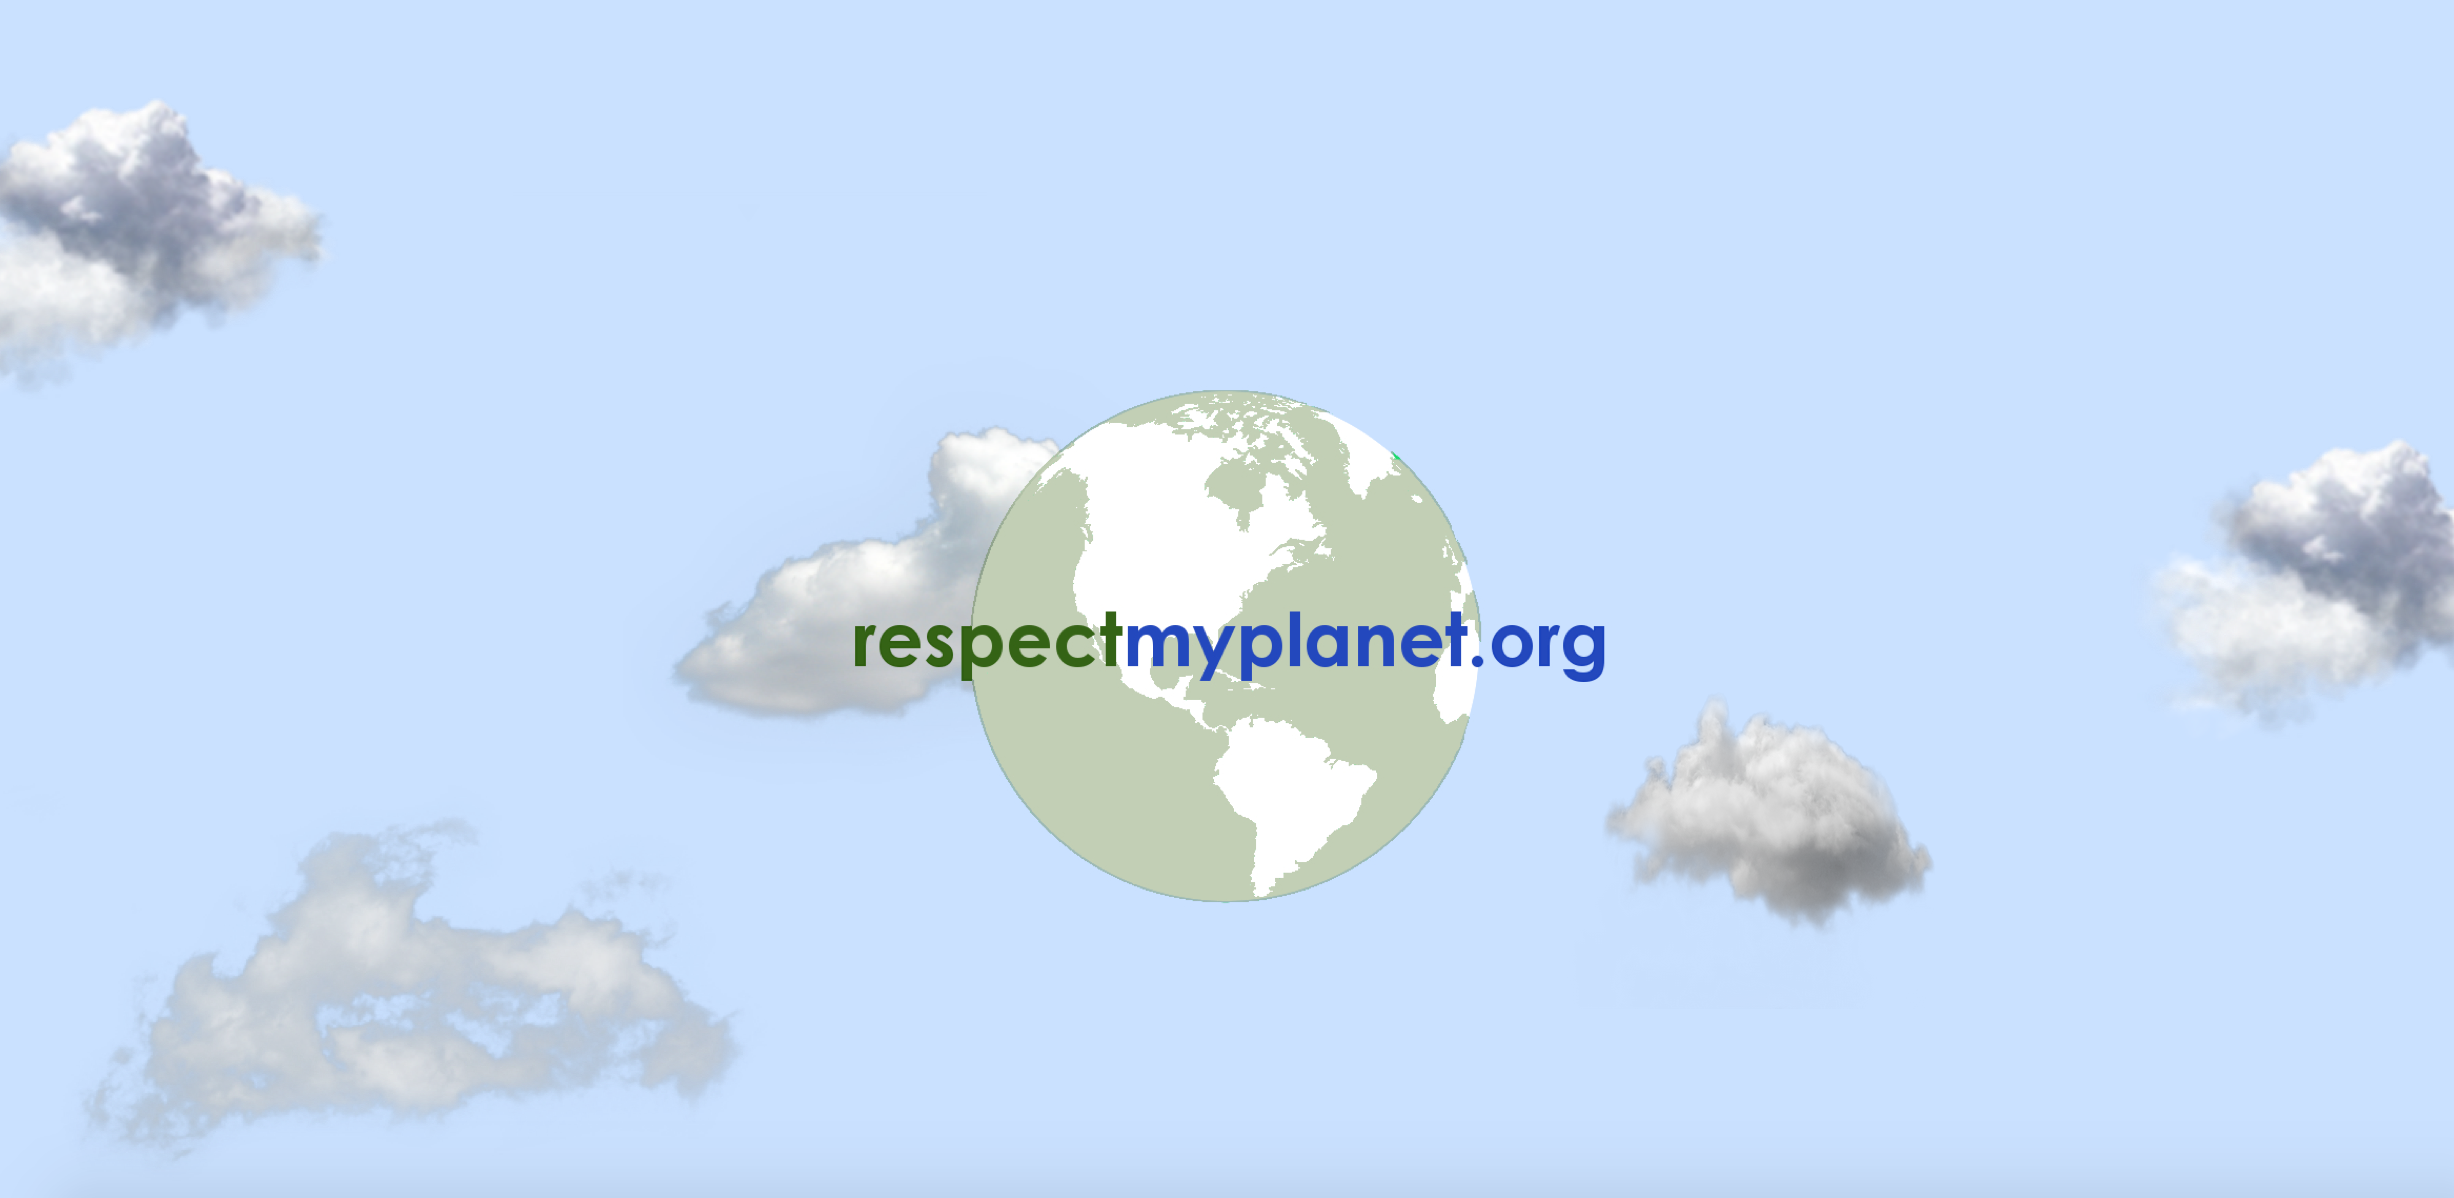 respectmyplanet about page